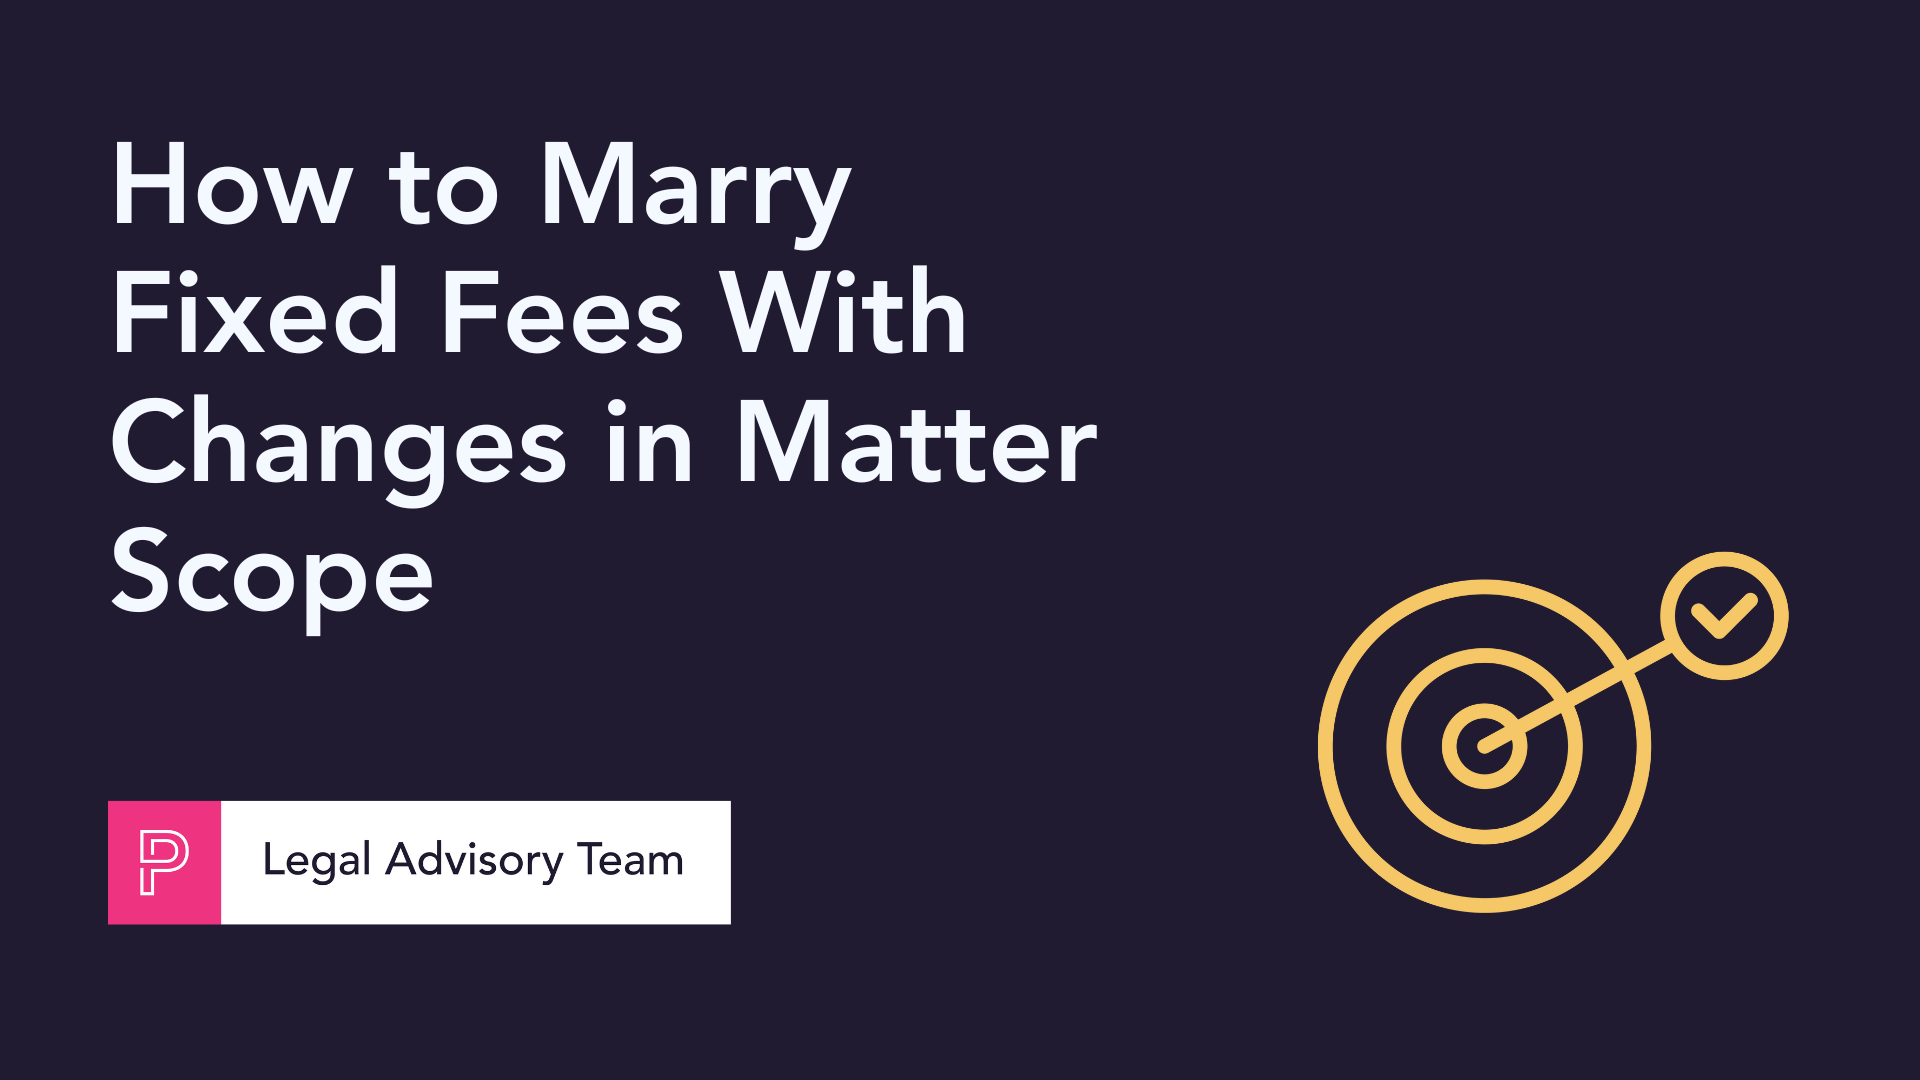 How to Marry Fixed Fees with Changes in Scope for Legal Services